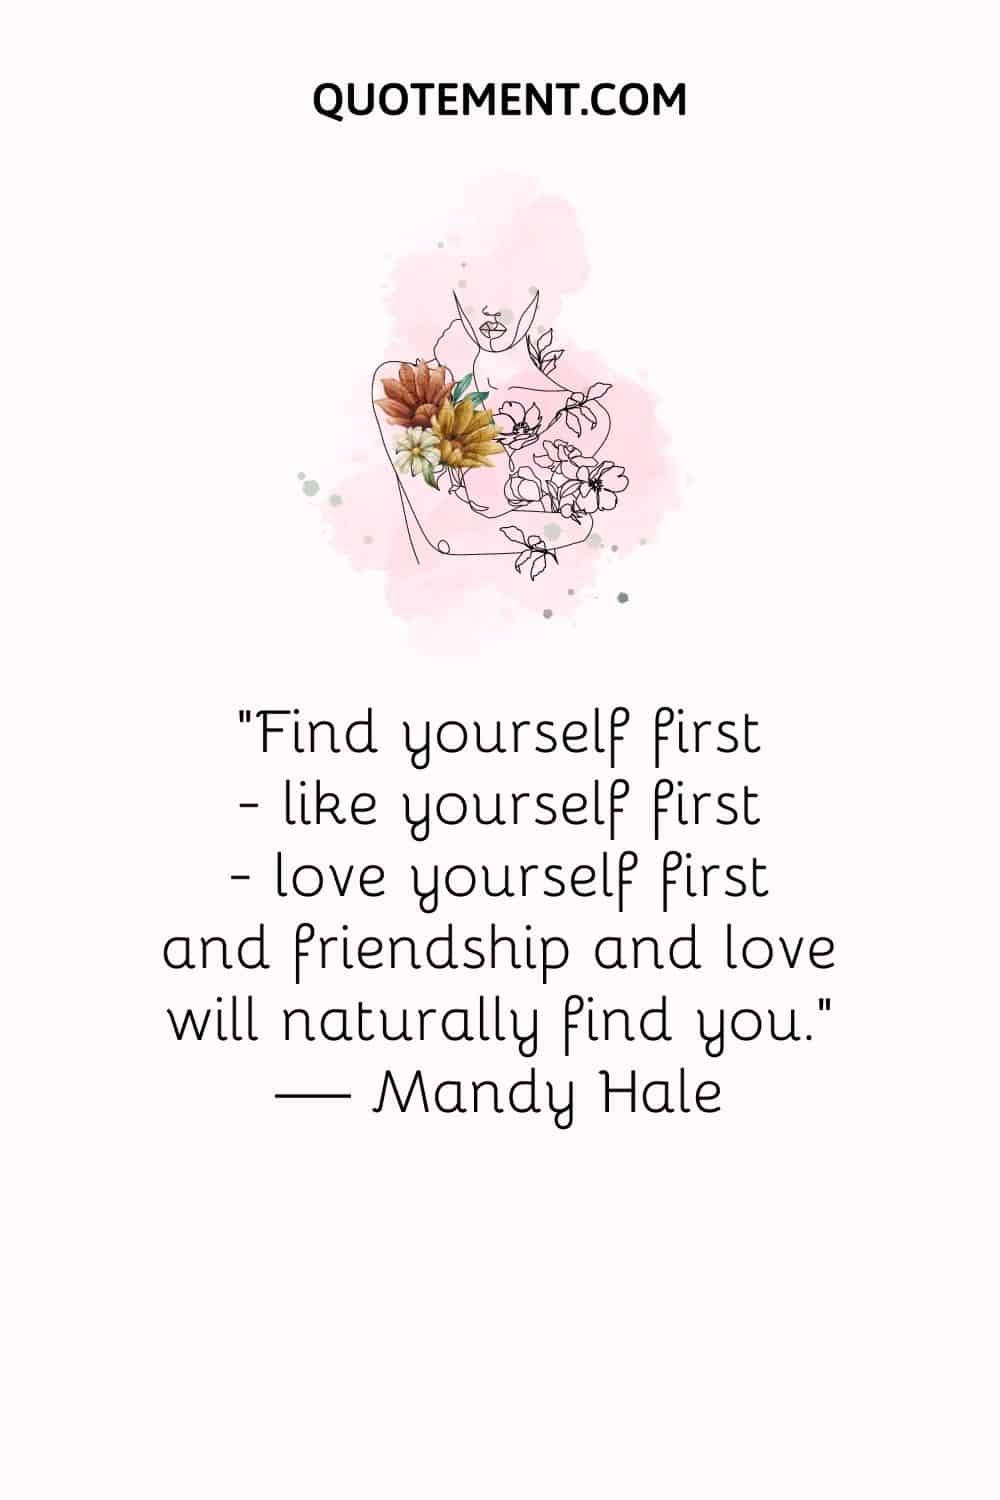 Find yourself first ― like yourself first ― love yourself first and friendship and love will naturally find you